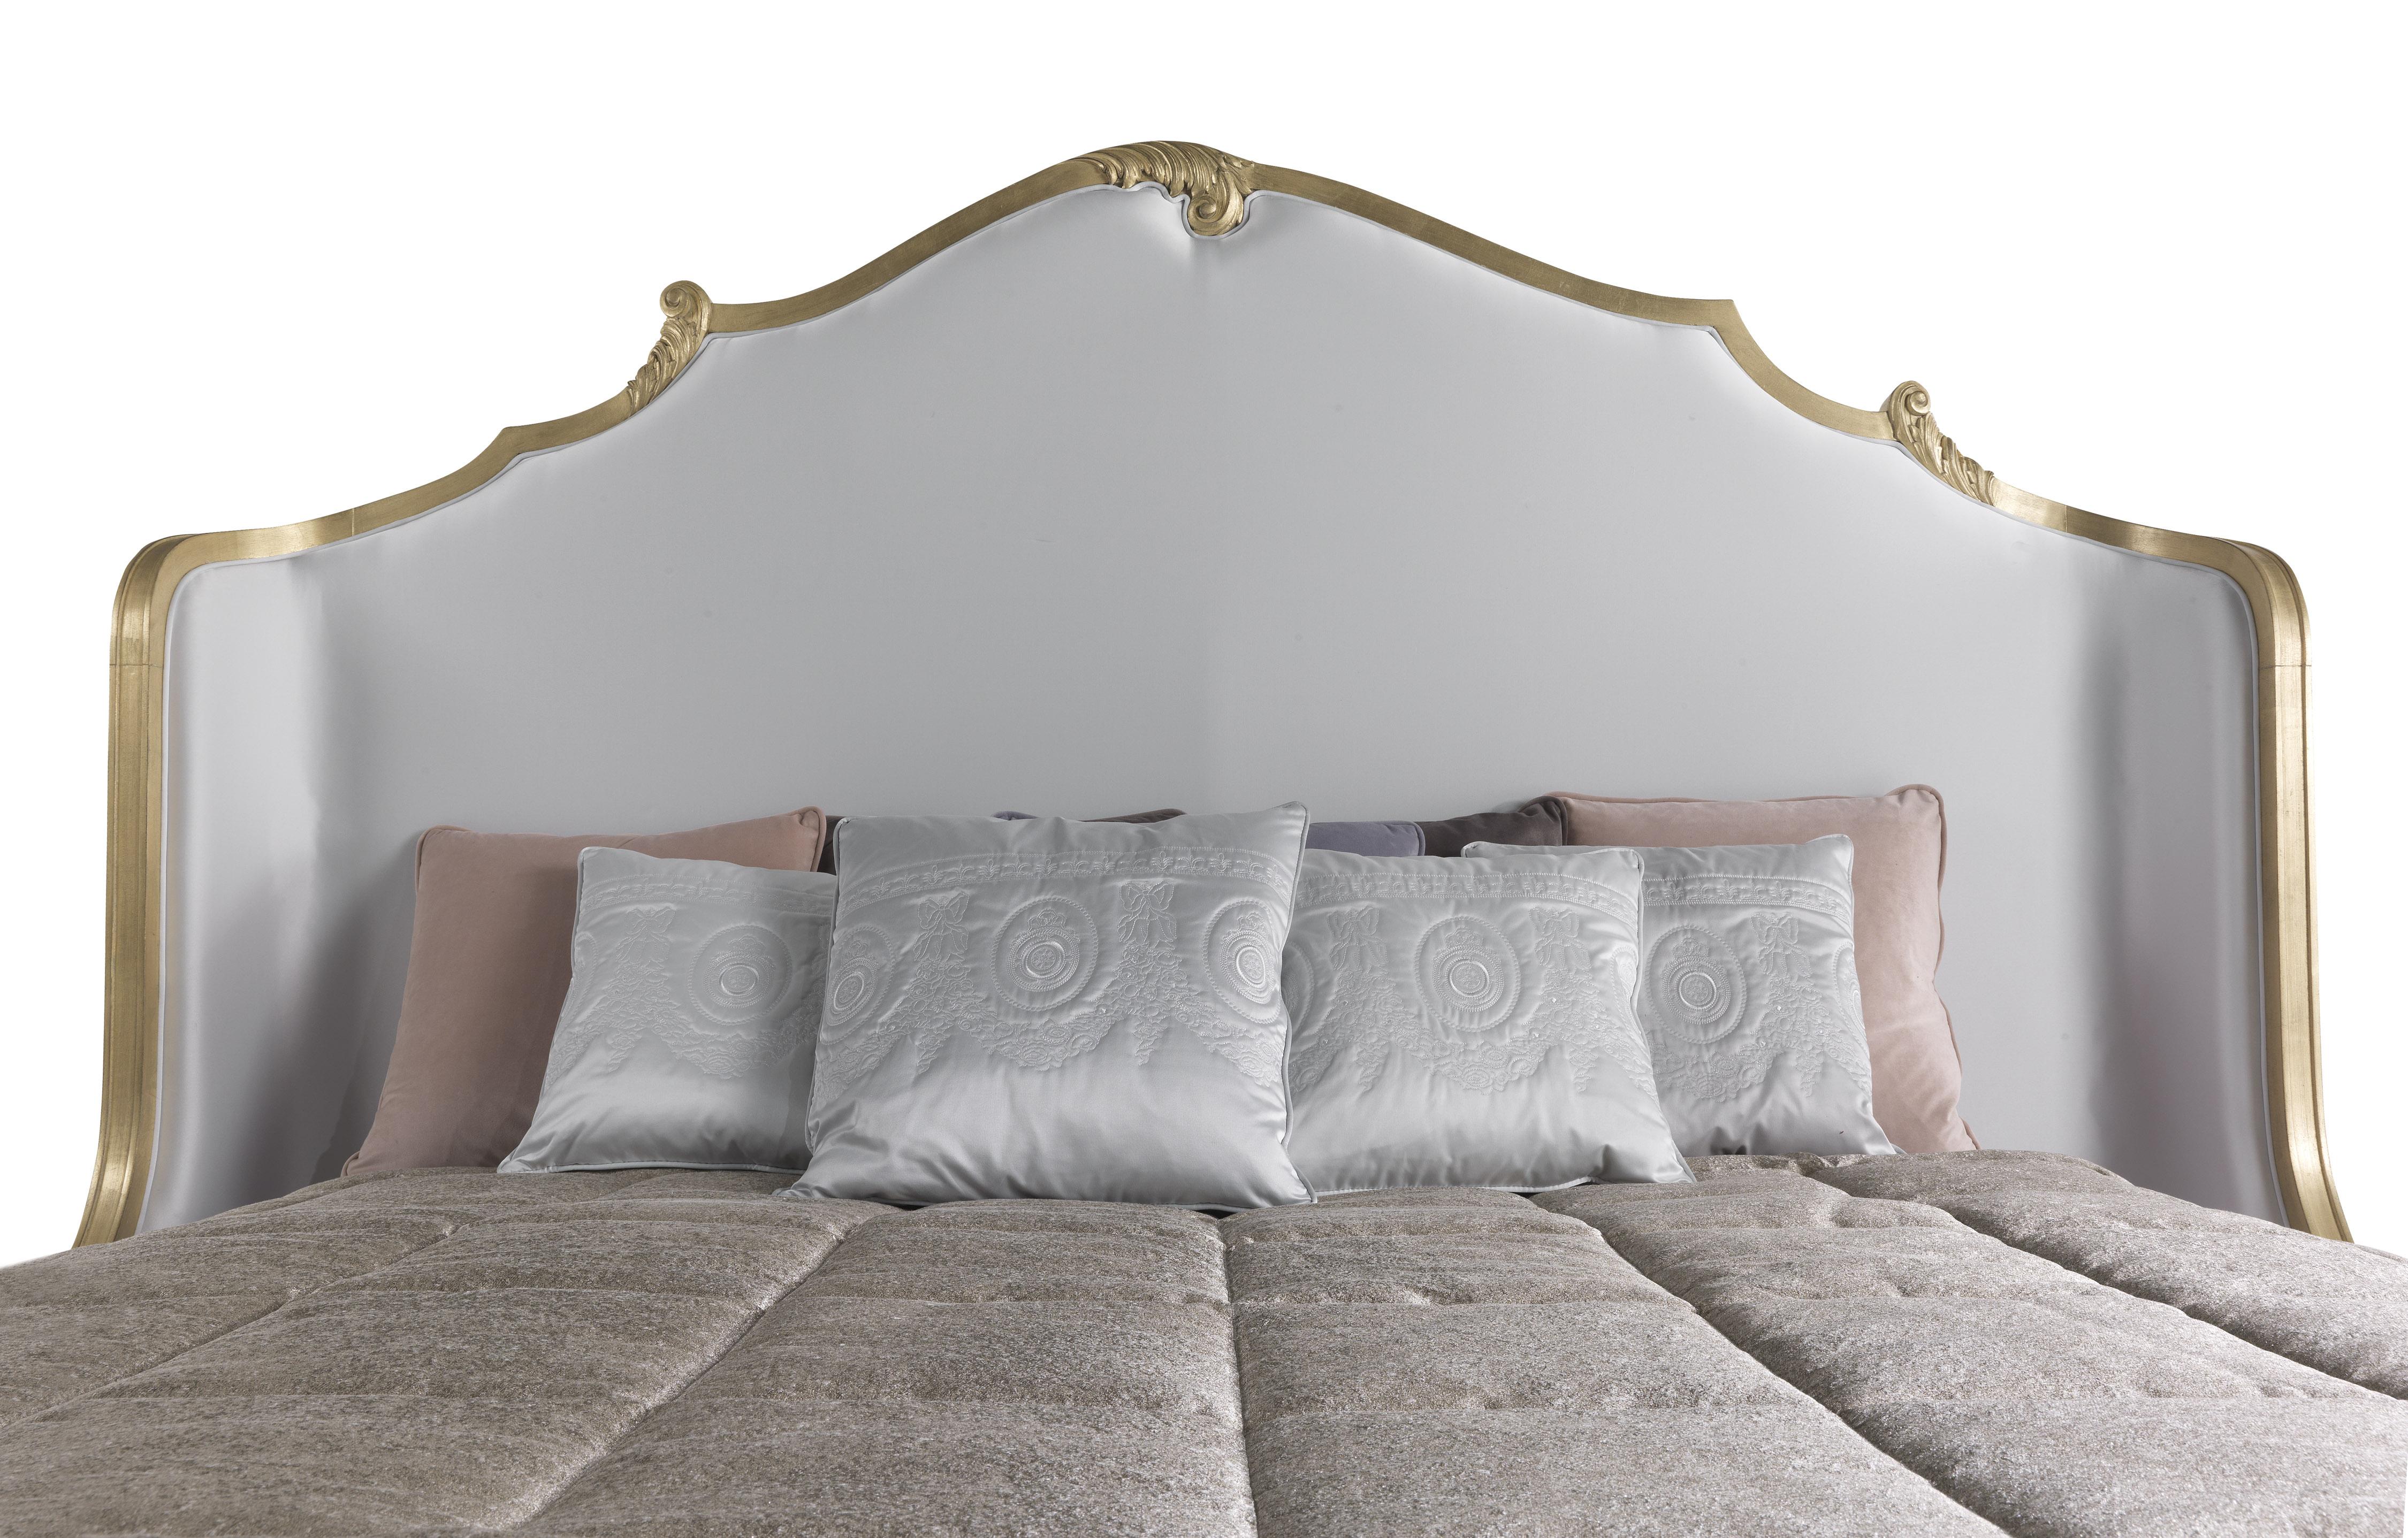 Annecy bed: a scenographic piece of furniture, designed to be the protagonist of the night area and characterized by an antique gold frame and a precious and refined light-grey satin upholstery.
Annecy Bed with structure in hand-carved beechwood